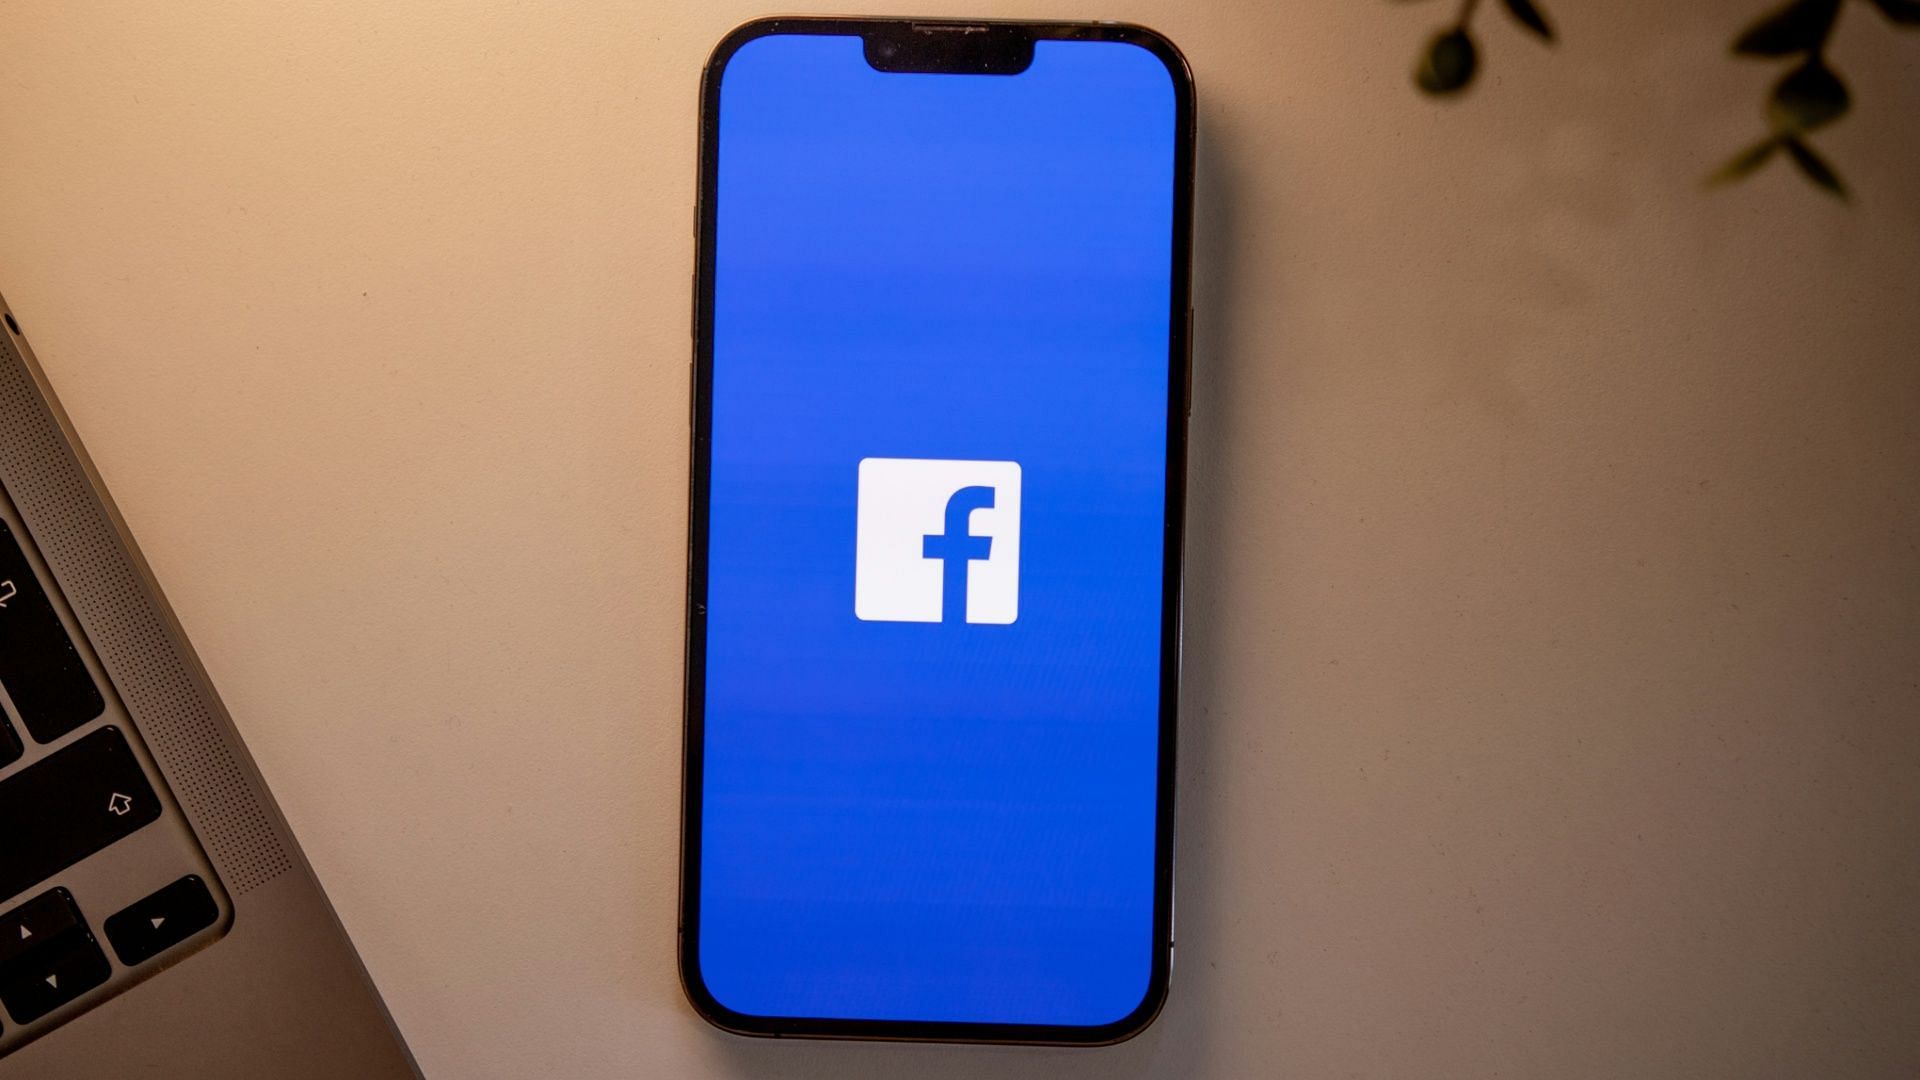 Mysterious chirping sound on Facebook turns out to be a technical error (Photo by dlxmedia.hu on Unsplash)